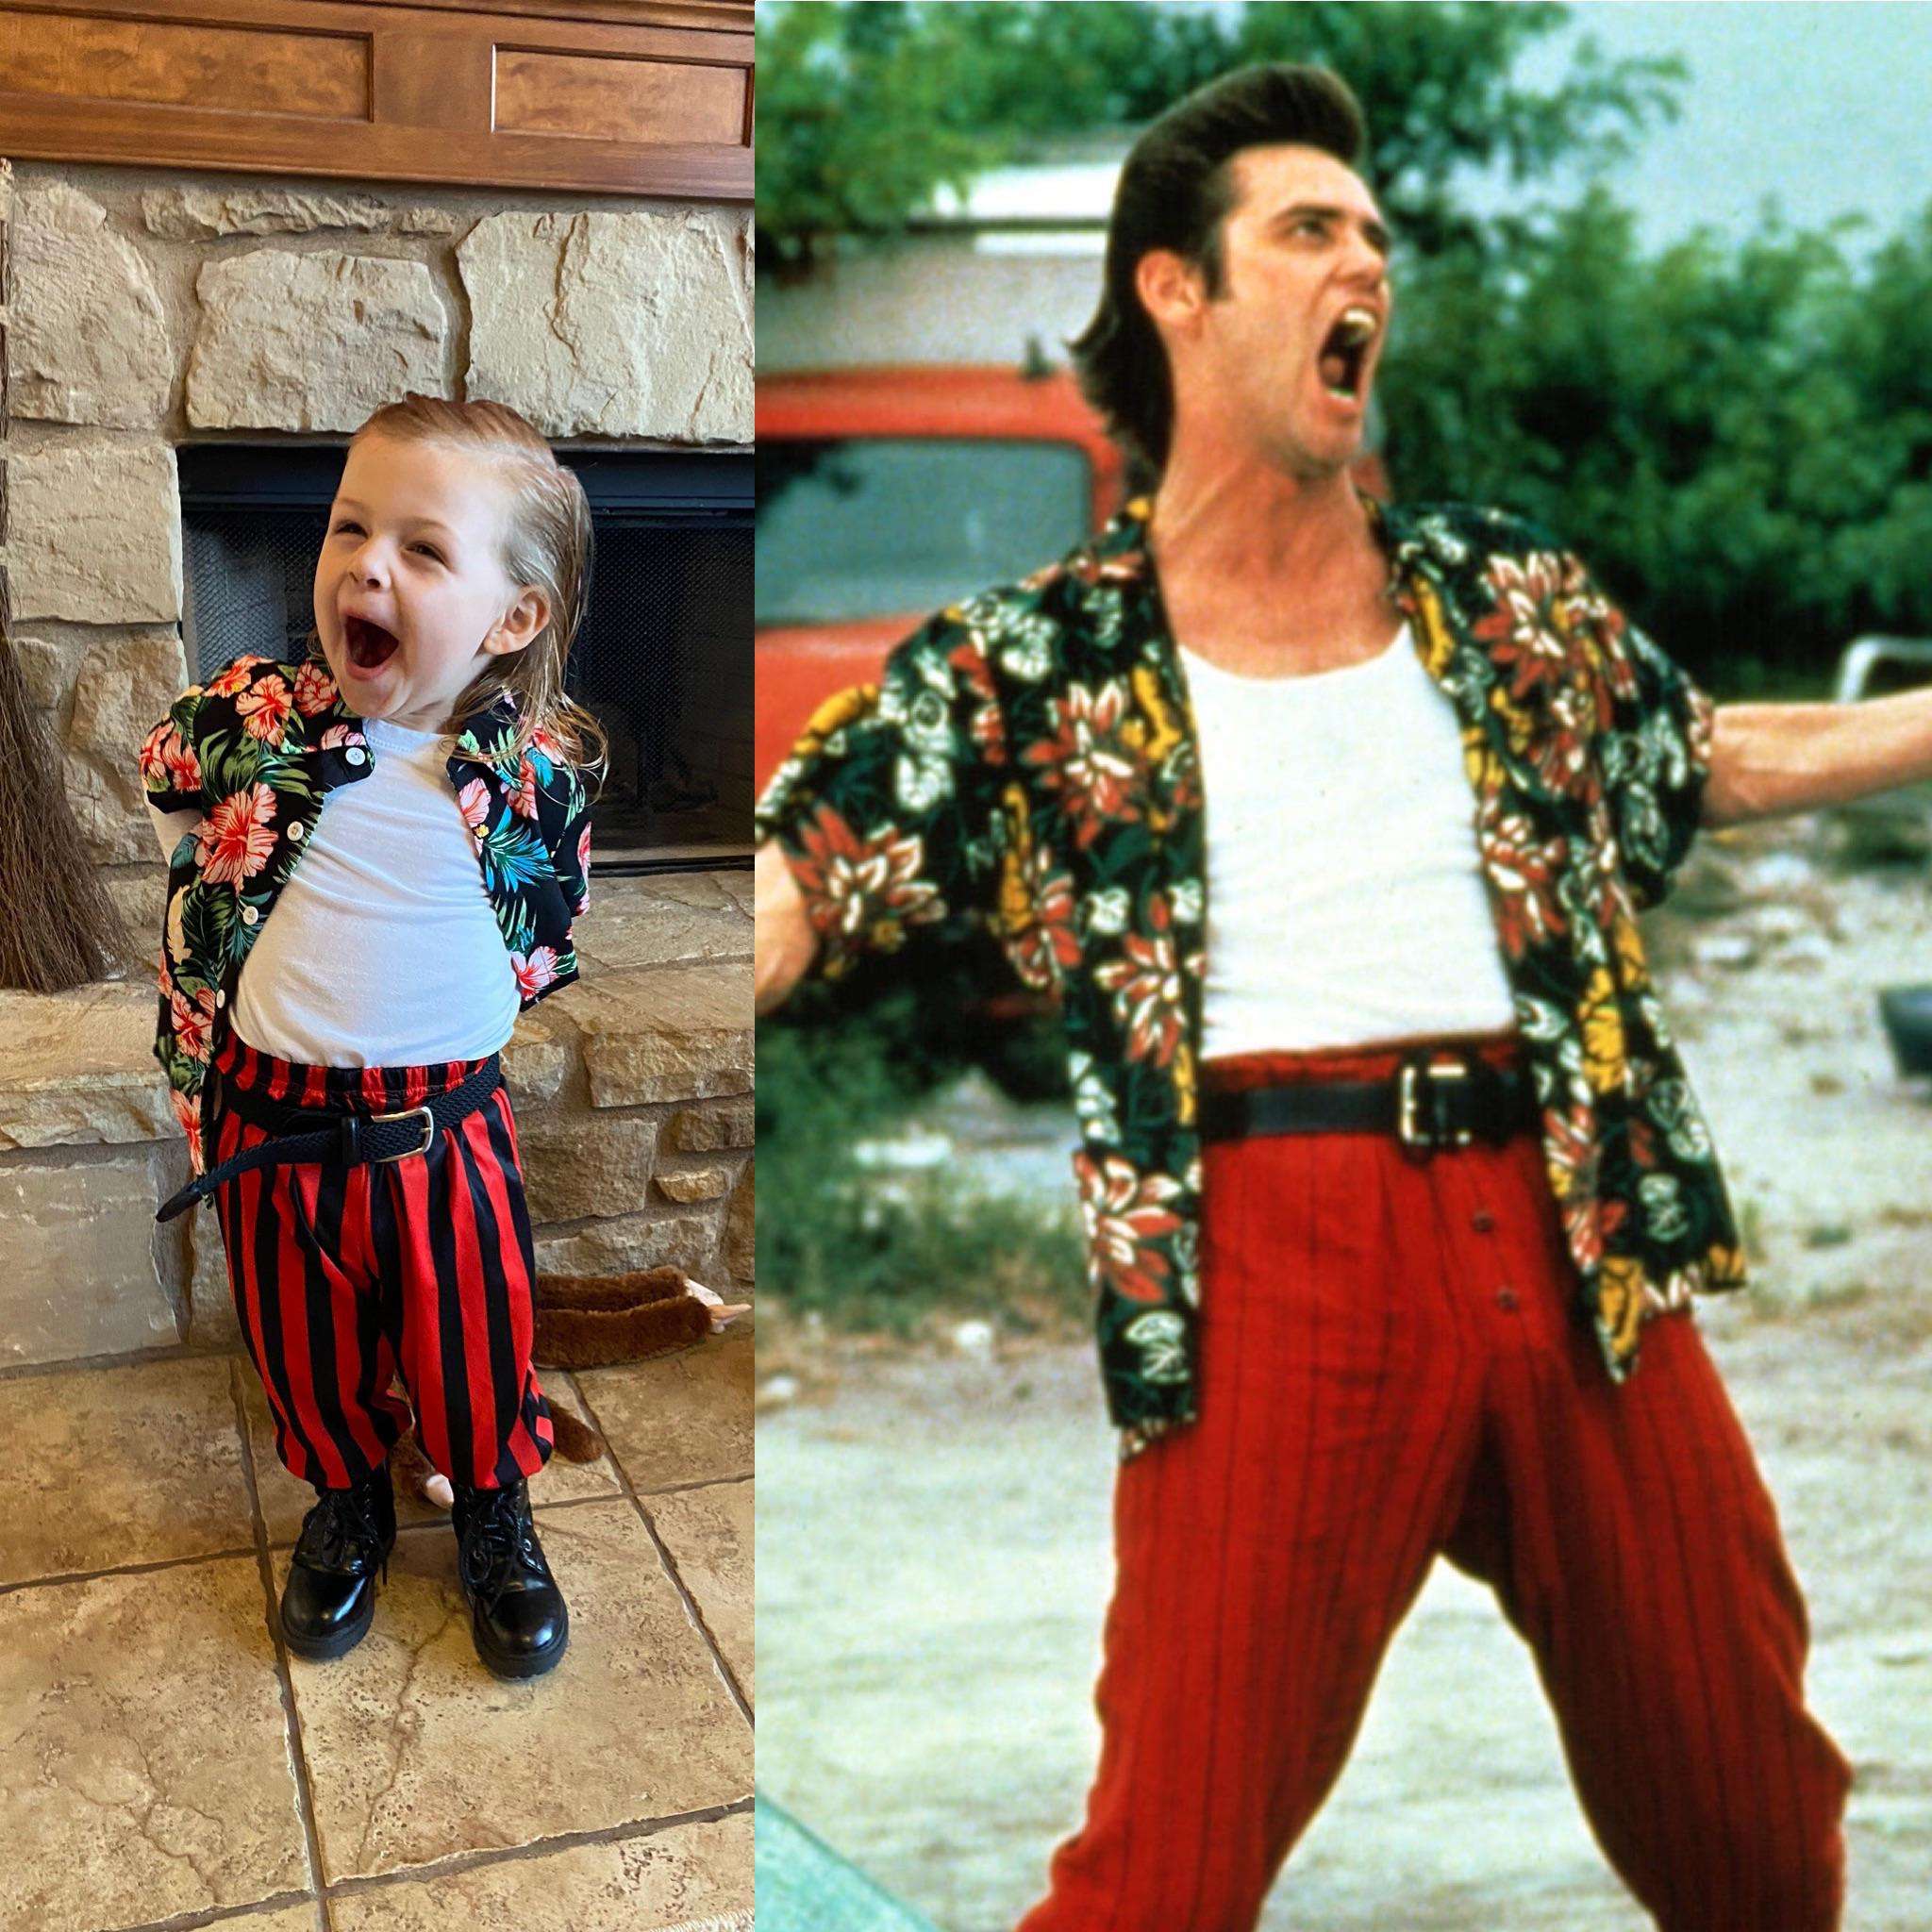 image showing Ace Ventura!!! My daughter really got into character this Halloween lol how’d we do??